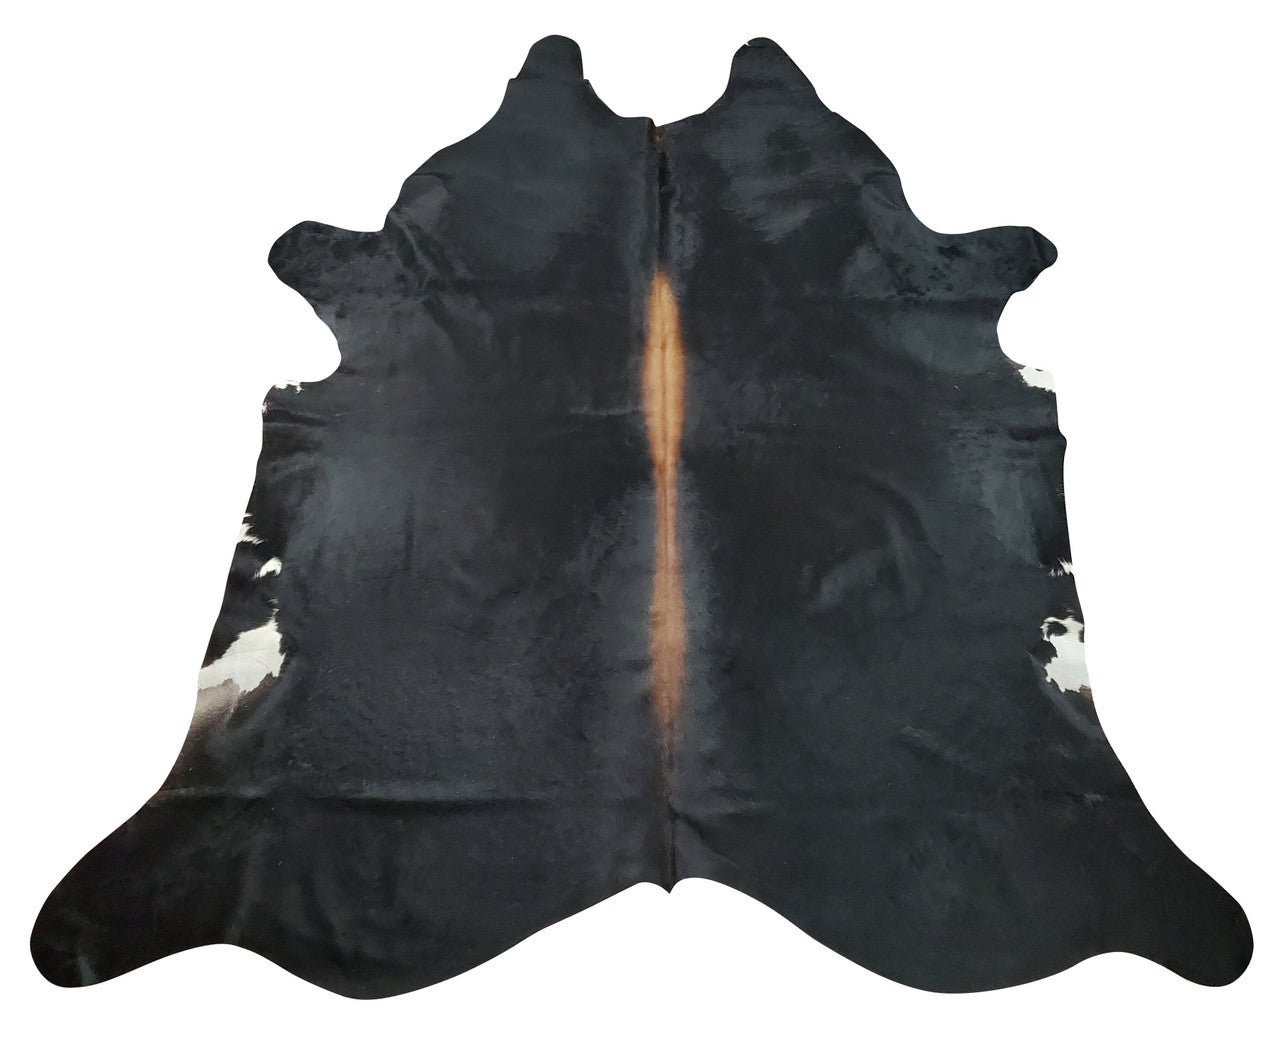 This dark cowhide is very beautiful, by far exceeded any expectations when it comes to quality, cowhide rugs Canada  couldn’t be happier. Highly recommend and will be ordering again in the future
